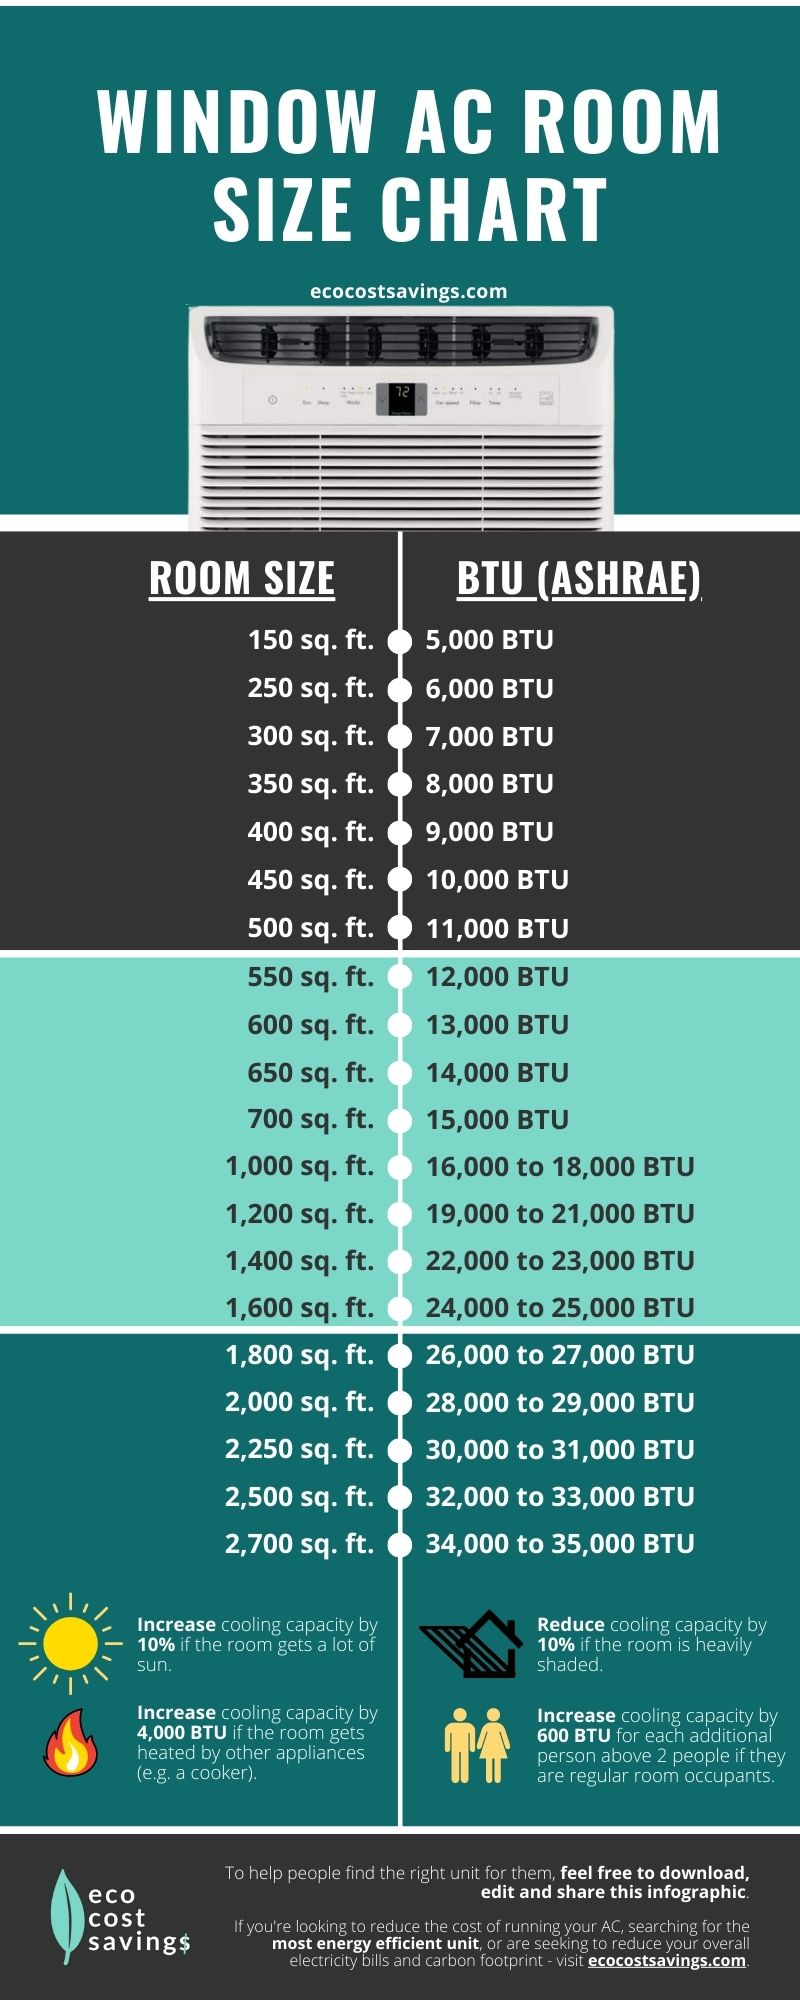 Window AC Room Size Chart Infographic containing room sizes and the corresponding window AC cooling capacity in BTU